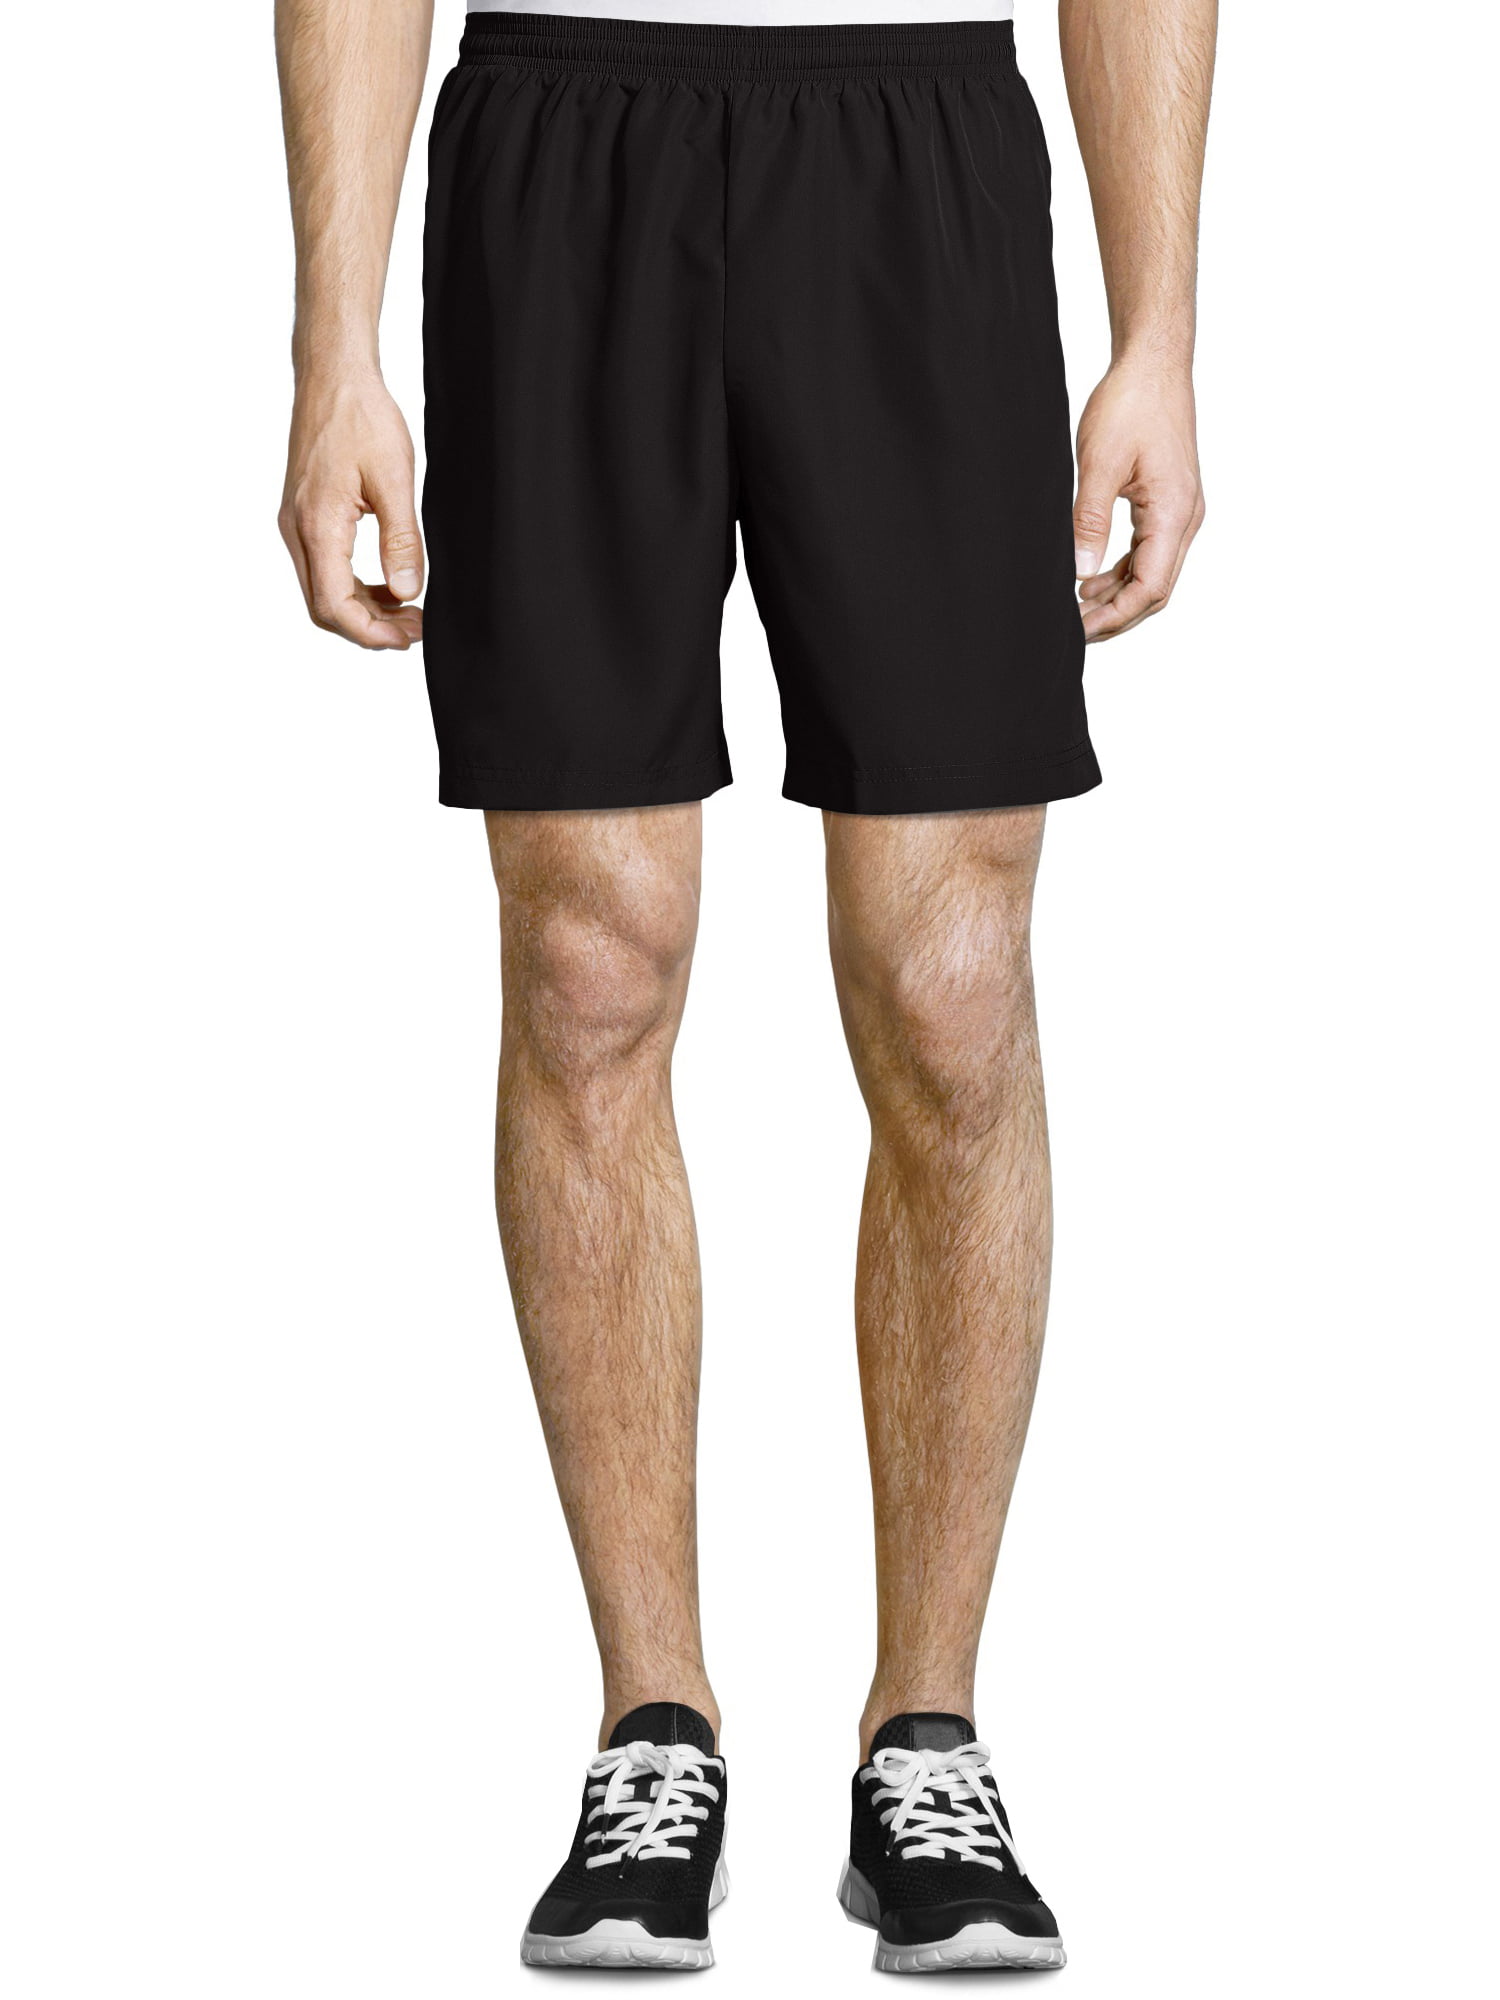 Hanes Sport Men's and Big Men's Performance Running Shorts, Up to Size ...